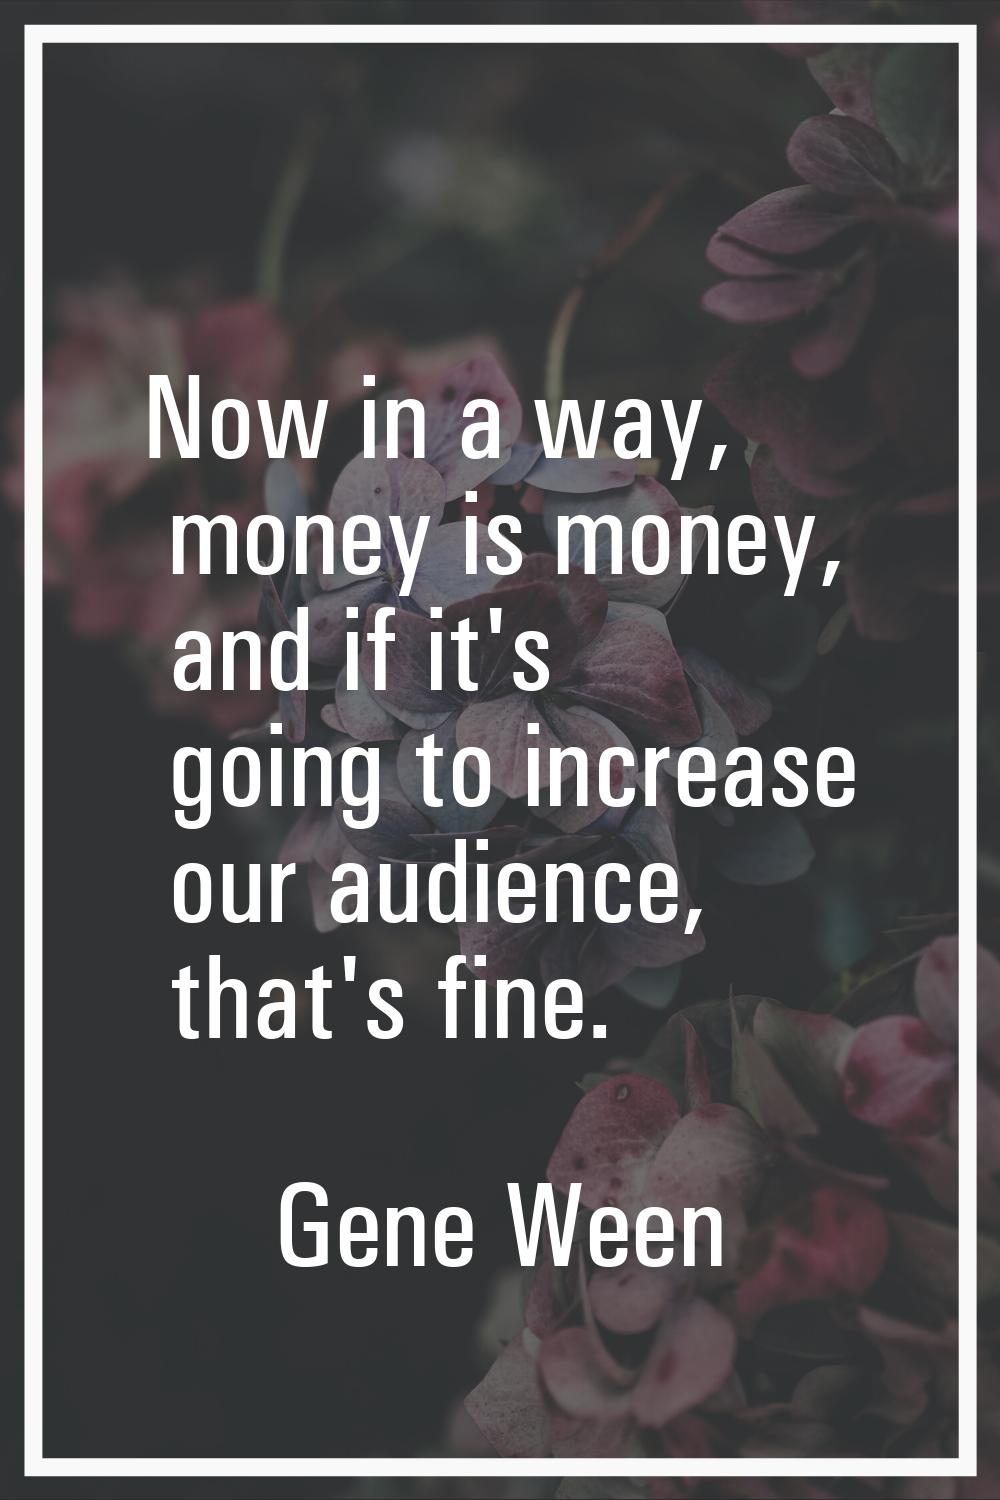 Now in a way, money is money, and if it's going to increase our audience, that's fine.